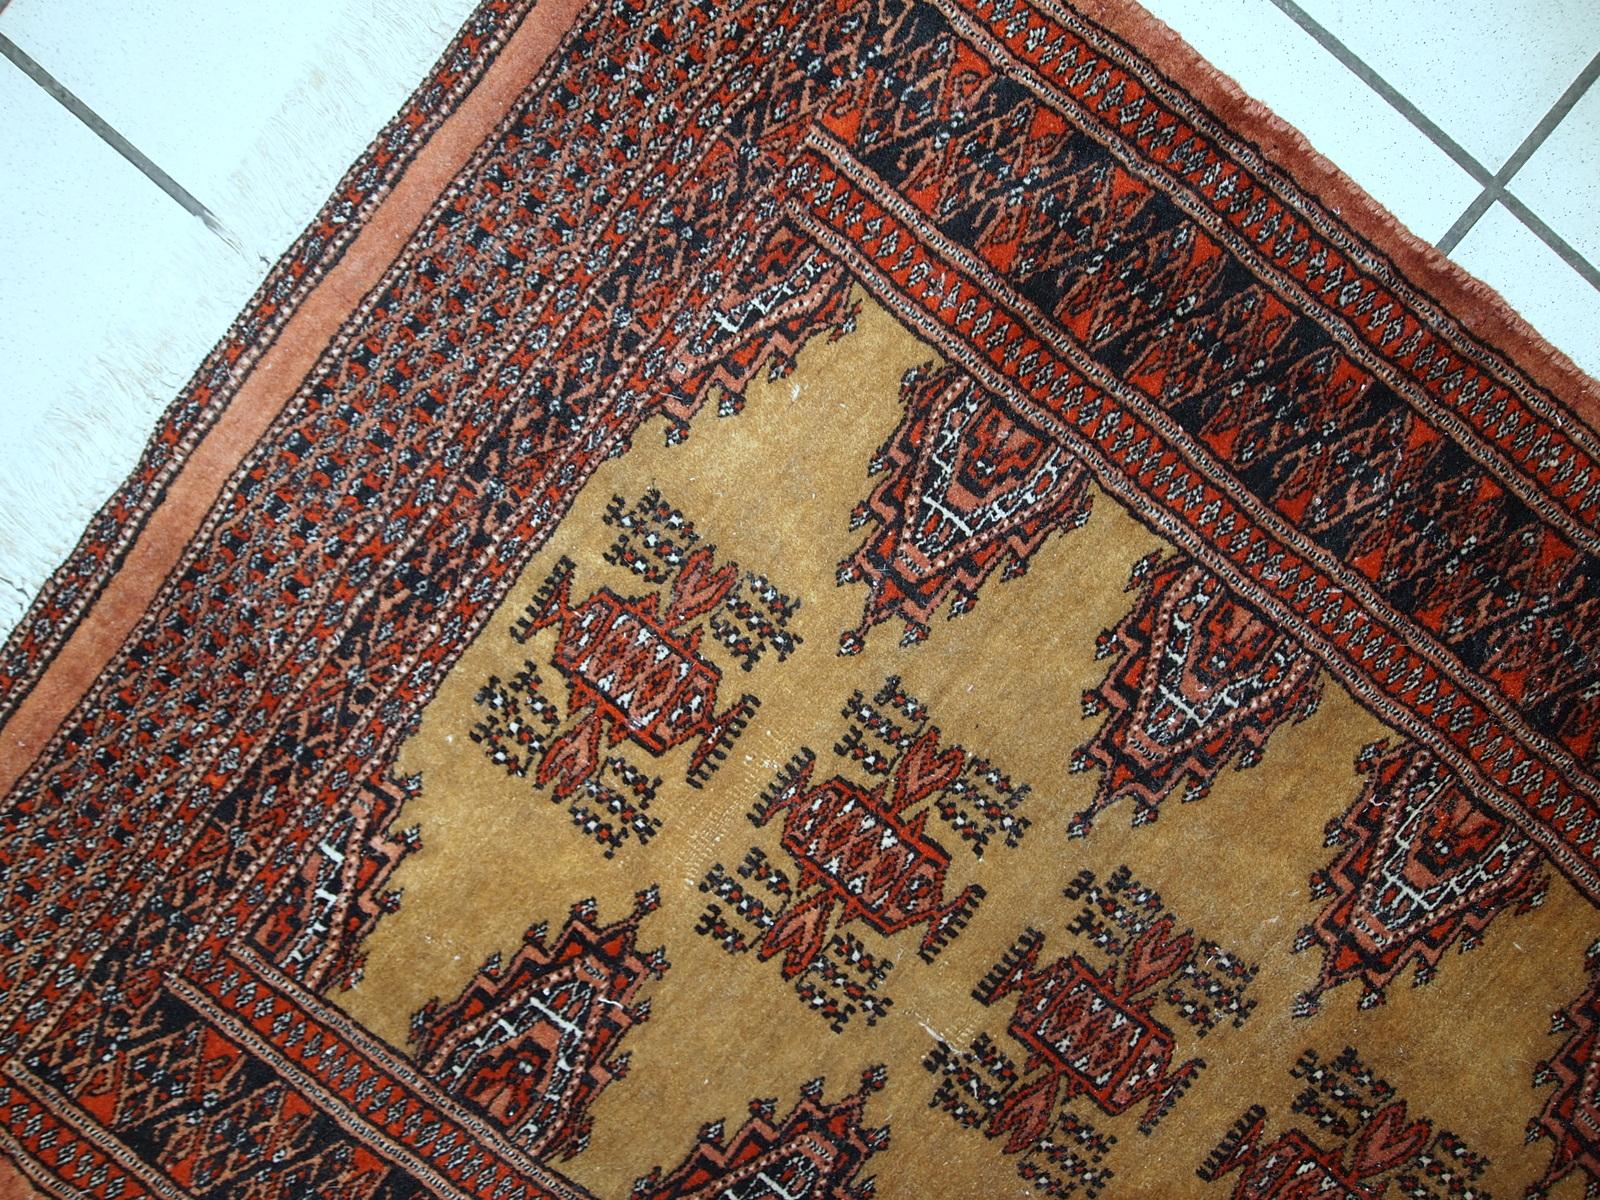 Handmade vintage Uzbek Bukhara rug in original condition, it has some age wear. The rug made in soft wool in the middle of 20th century. 

-condition: original, some signs of age,

-circa 1960s,

-size: 2.5' x 3.9' (77cm x